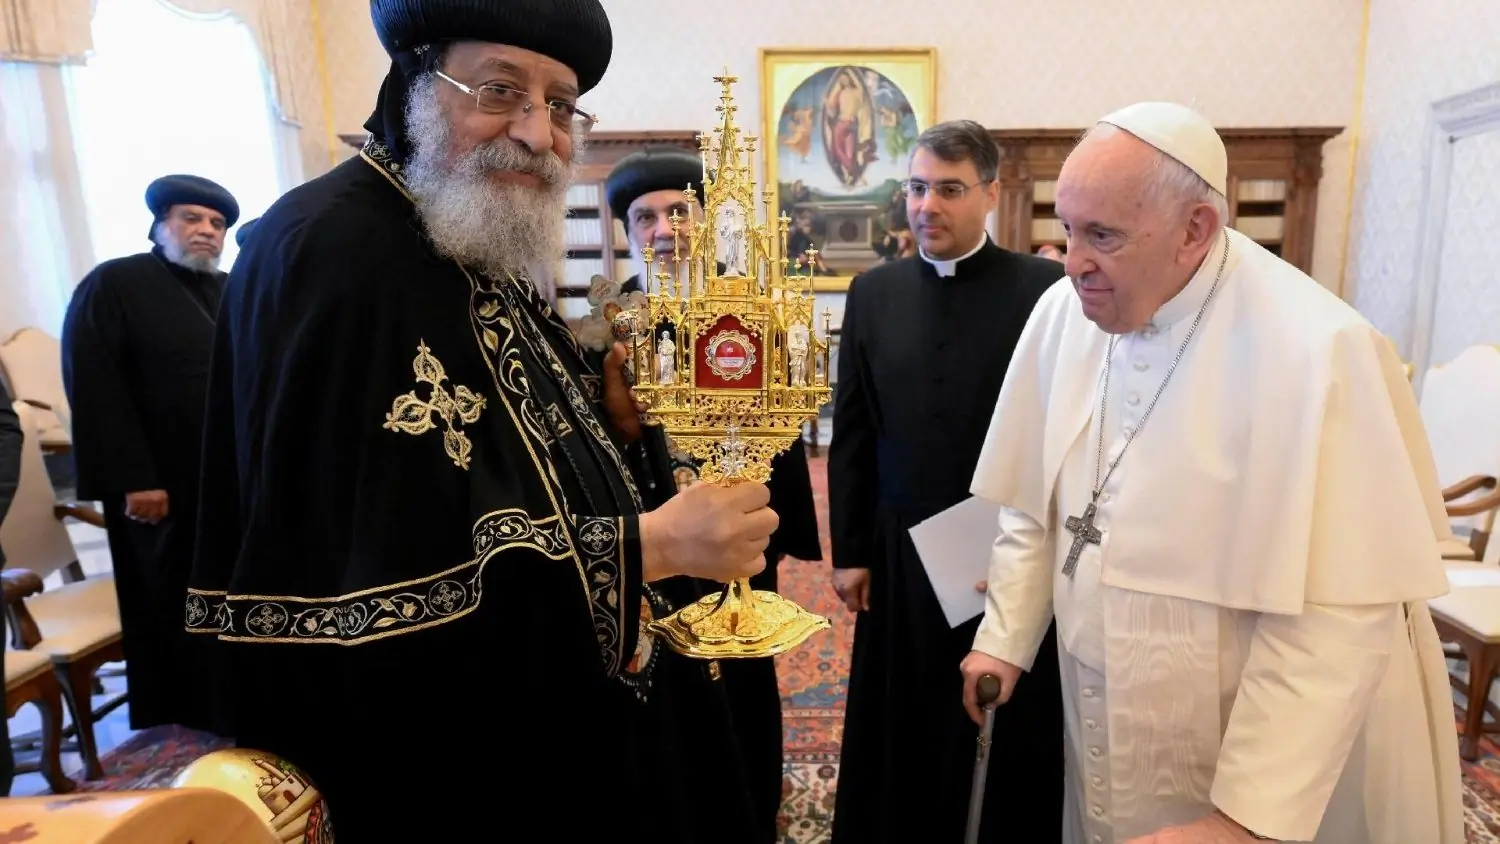 Coptic Pope Tawadros II holds a reliquary containing relics of the 21 Coptic Martyrs. The Coptic delegation brought a gift of the relics to Pope Francis